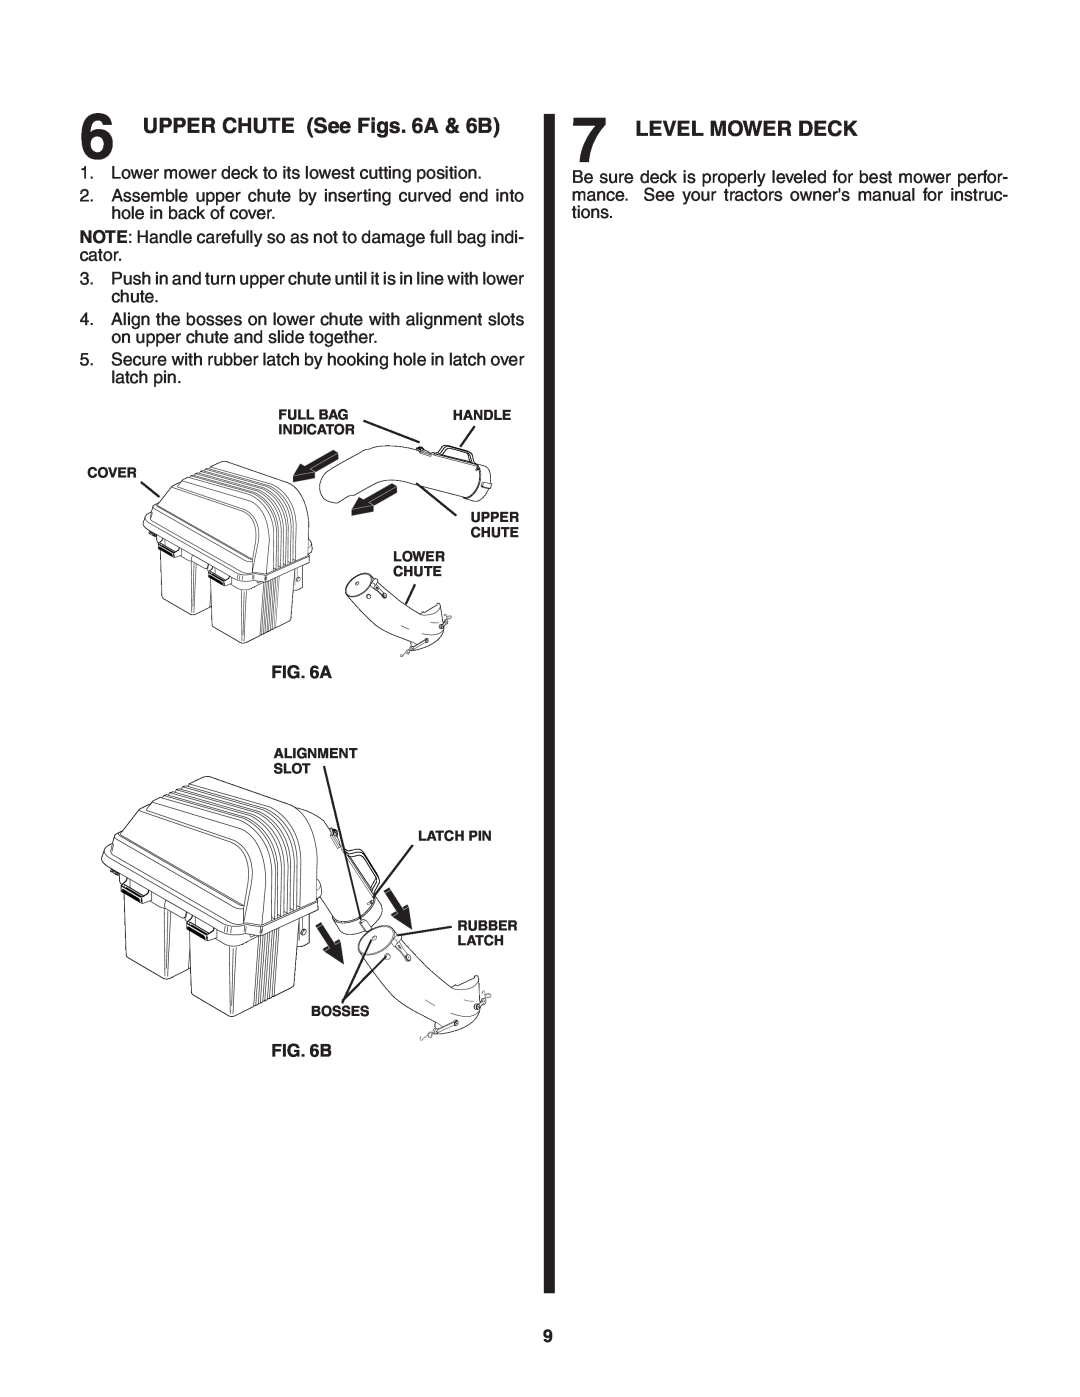 Poulan QCT42, 402338, 960 72 00-06 owner manual UPPER CHUTE See Figs. 6A & 6B, Level Mower Deck 